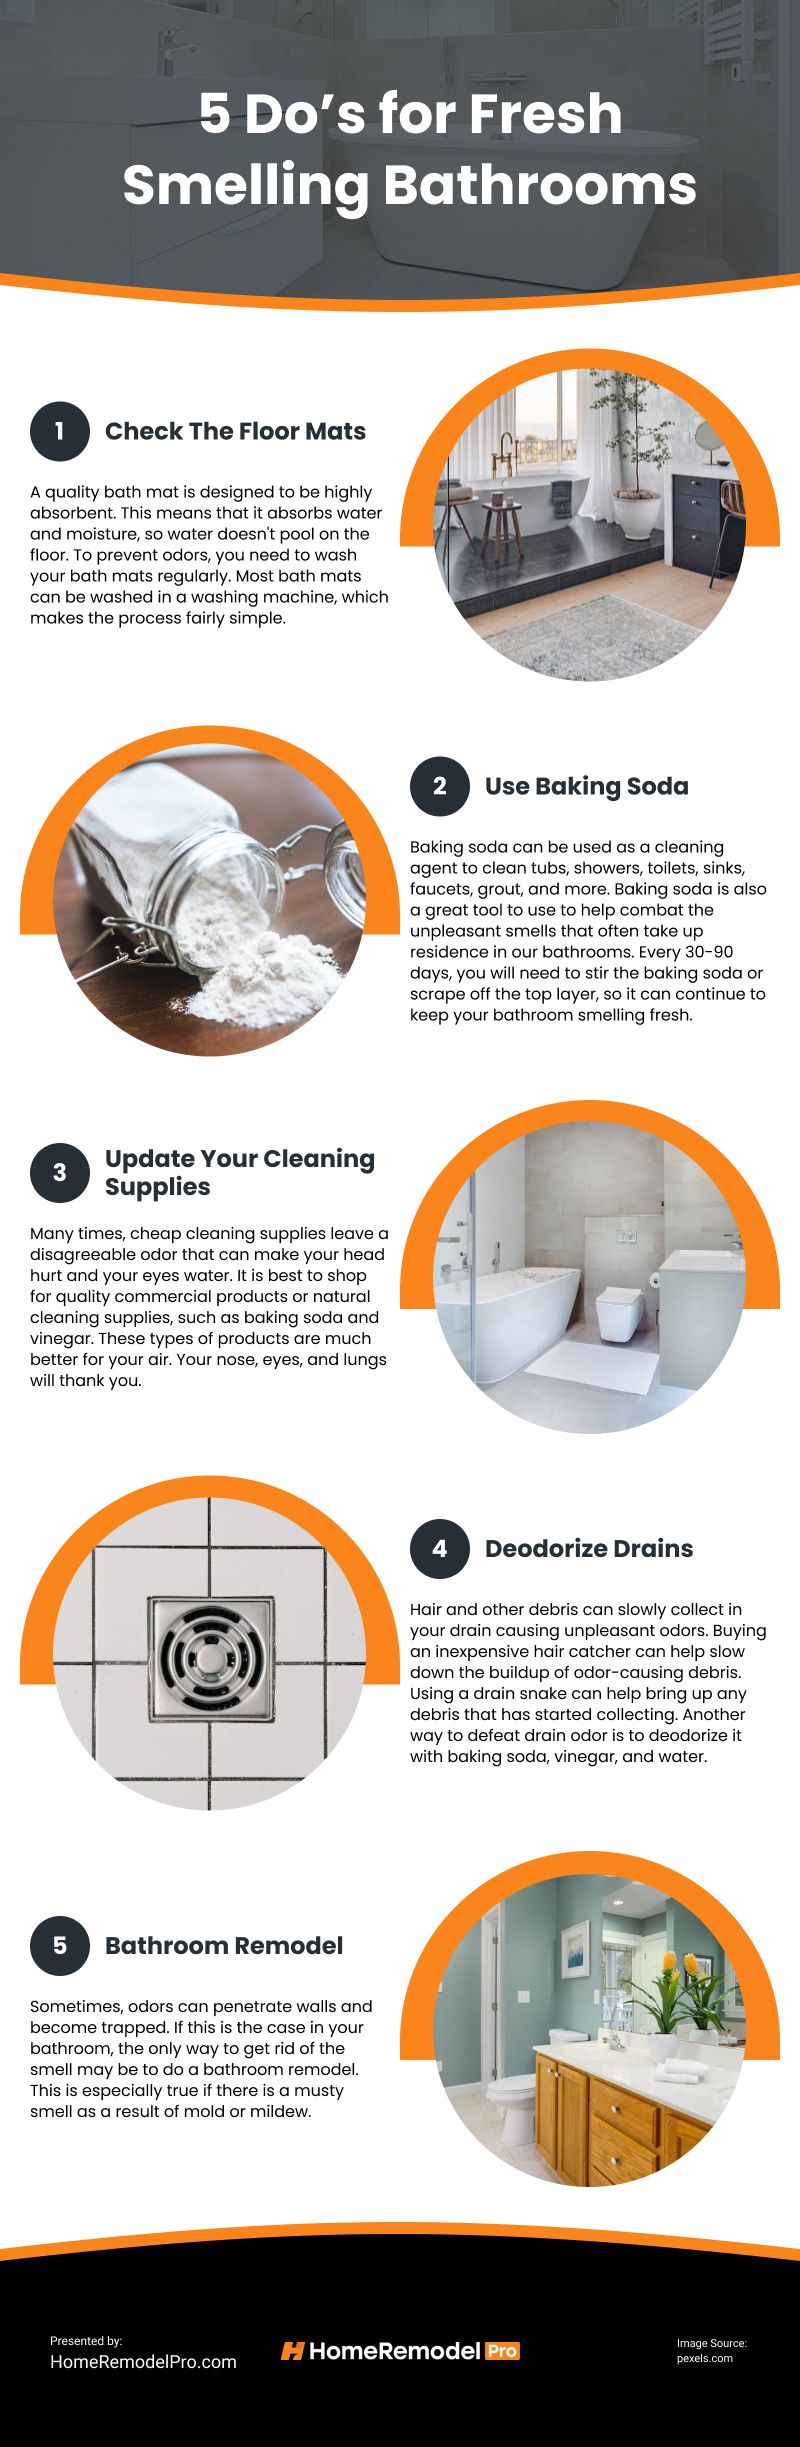 5 Do's for Fresh Smelling Bathrooms Infographic